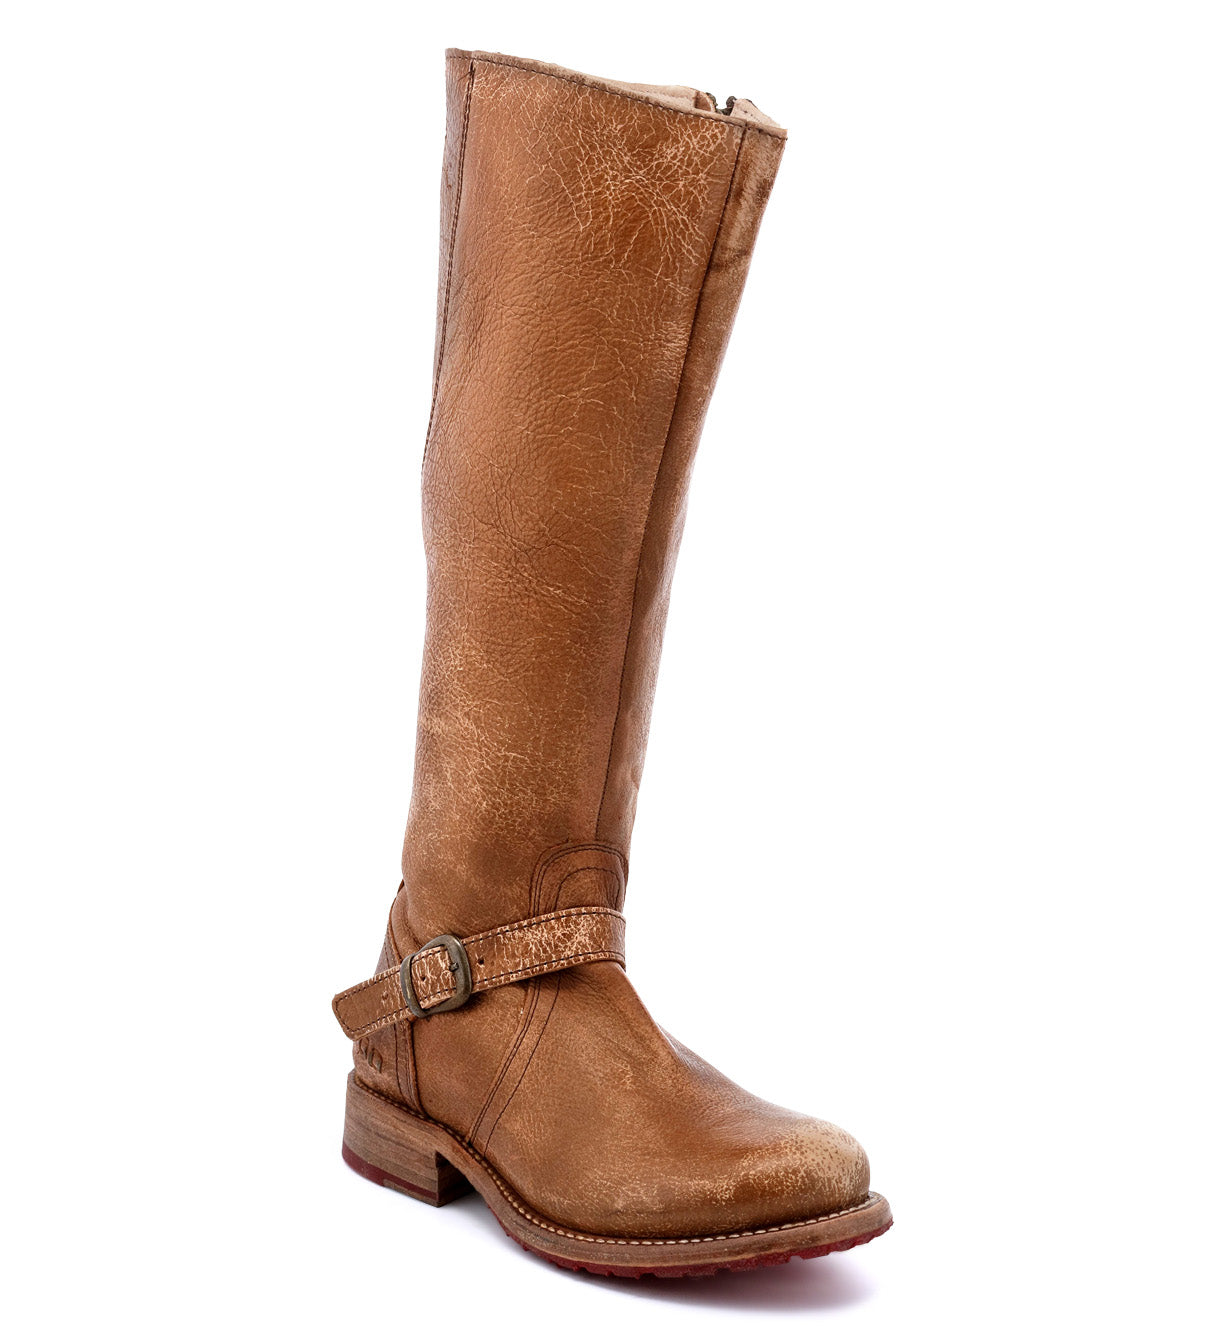 A women's Glaye tan leather riding boot with buckles by Bed Stu.